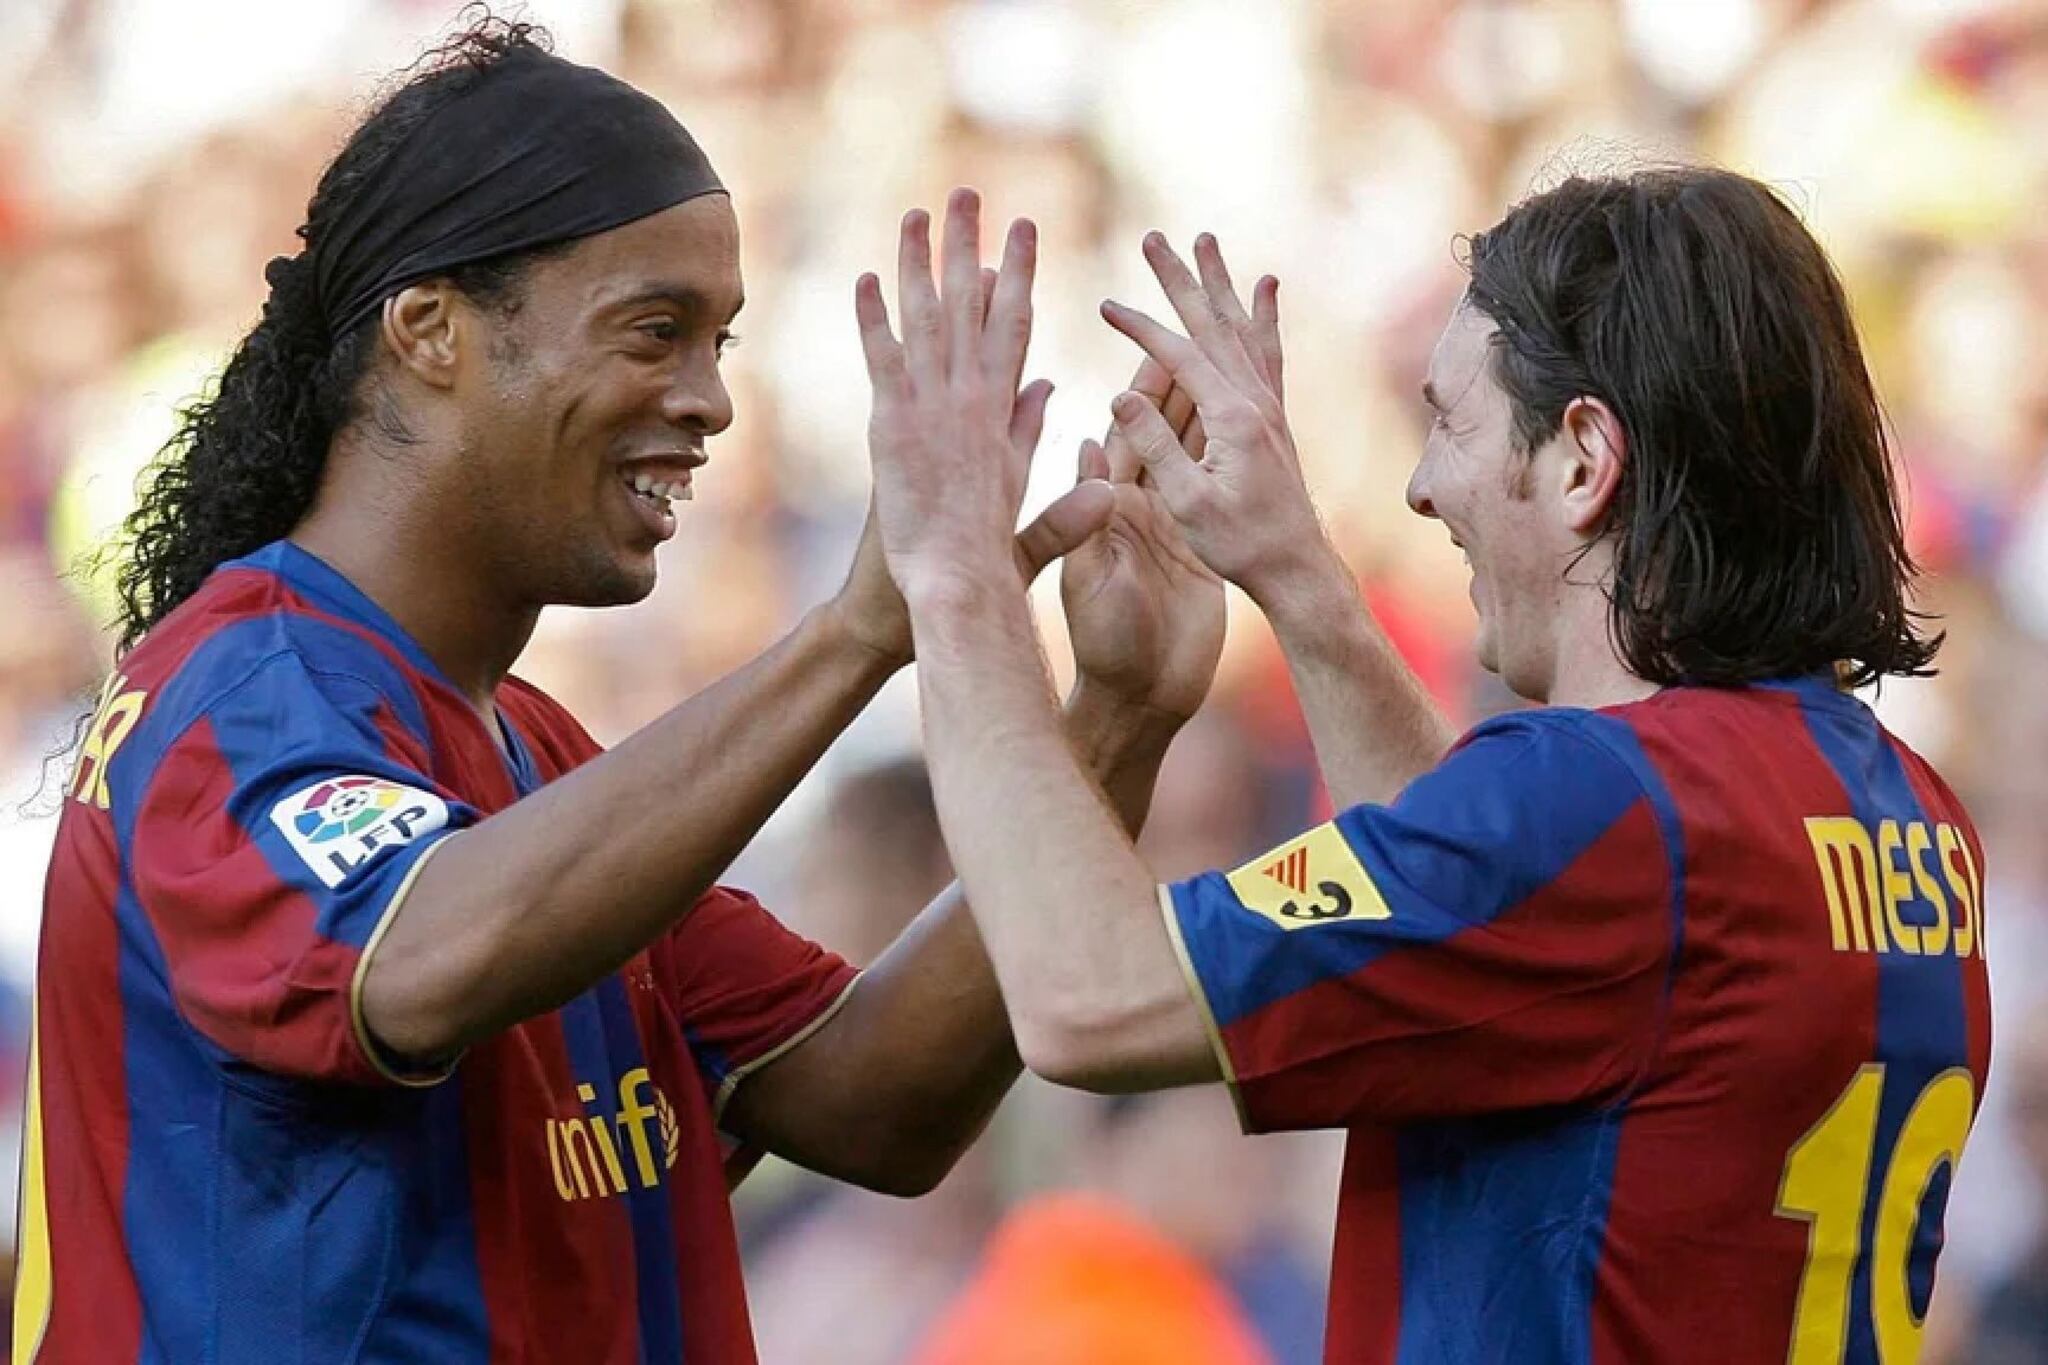 Lionel Messi's nostalgic comment with which he remembered the old days at Barcelona with Ronaldinho